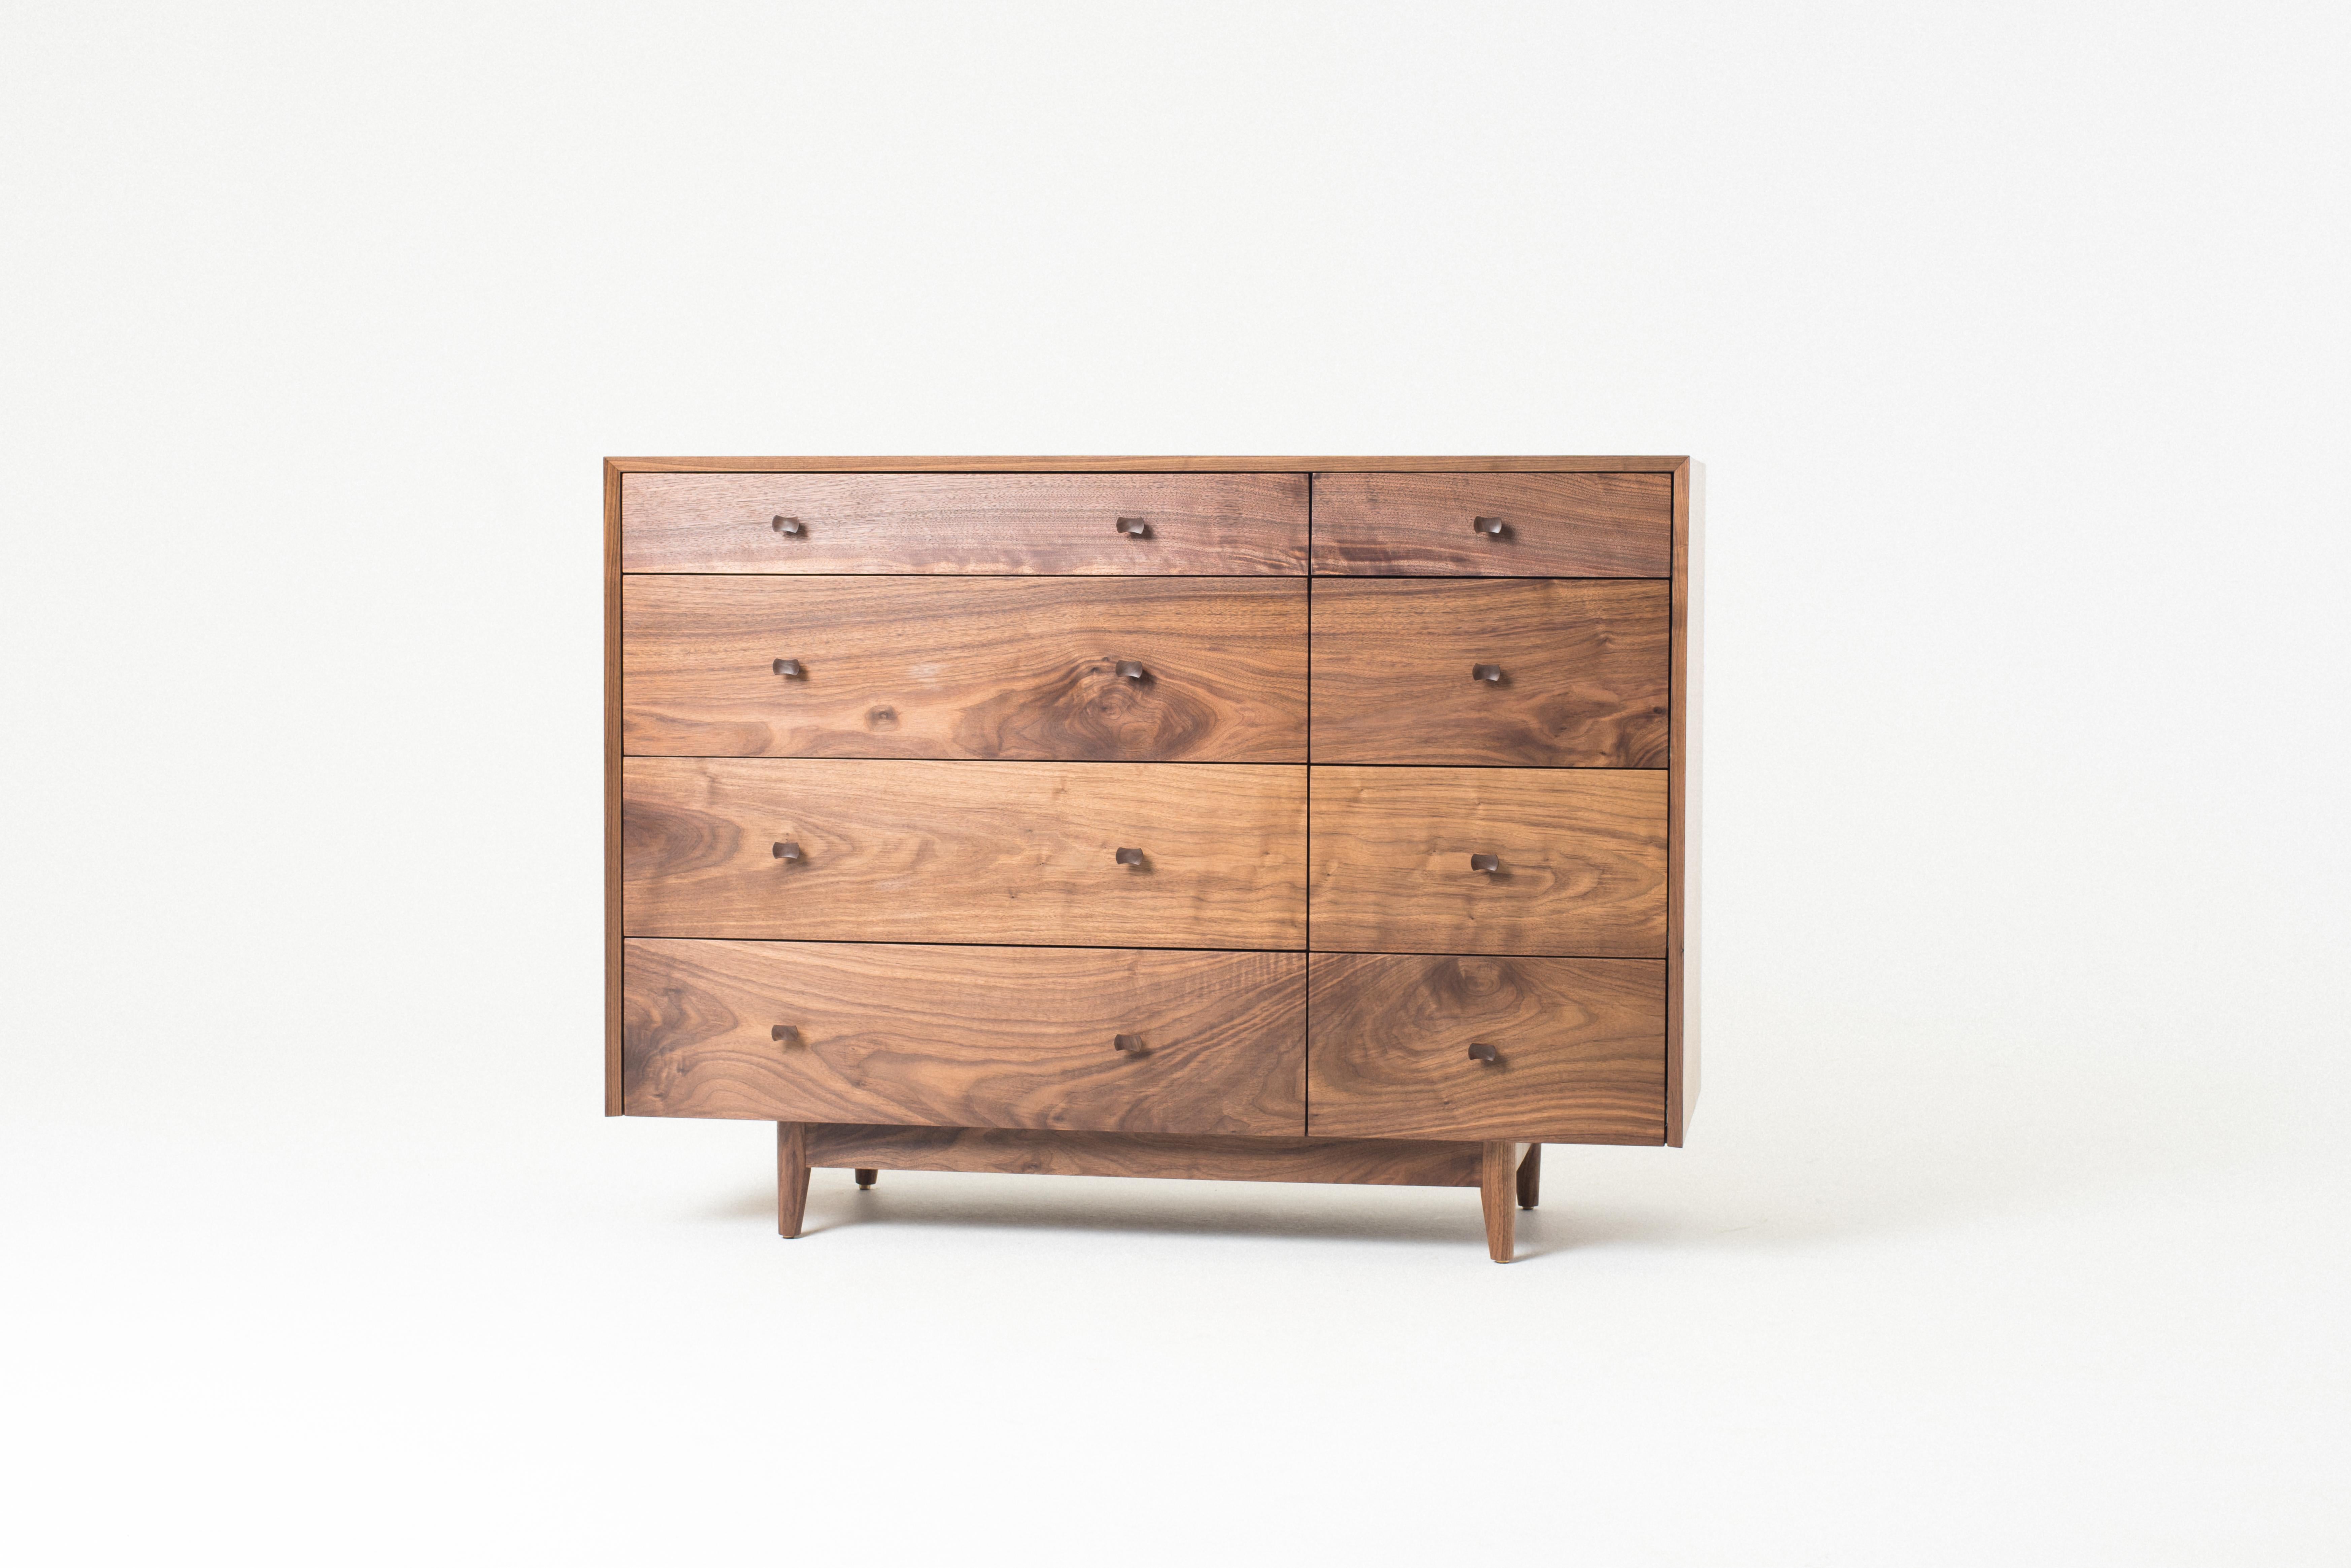 The Dorothy Bureau is a solid wood chest of drawers with a continuous grain matched waterfall miter from side to top to side. The drawer fronts are grain matched. 8 solid maple drawer boxes slide easily on self closing slides. The flume knobs are